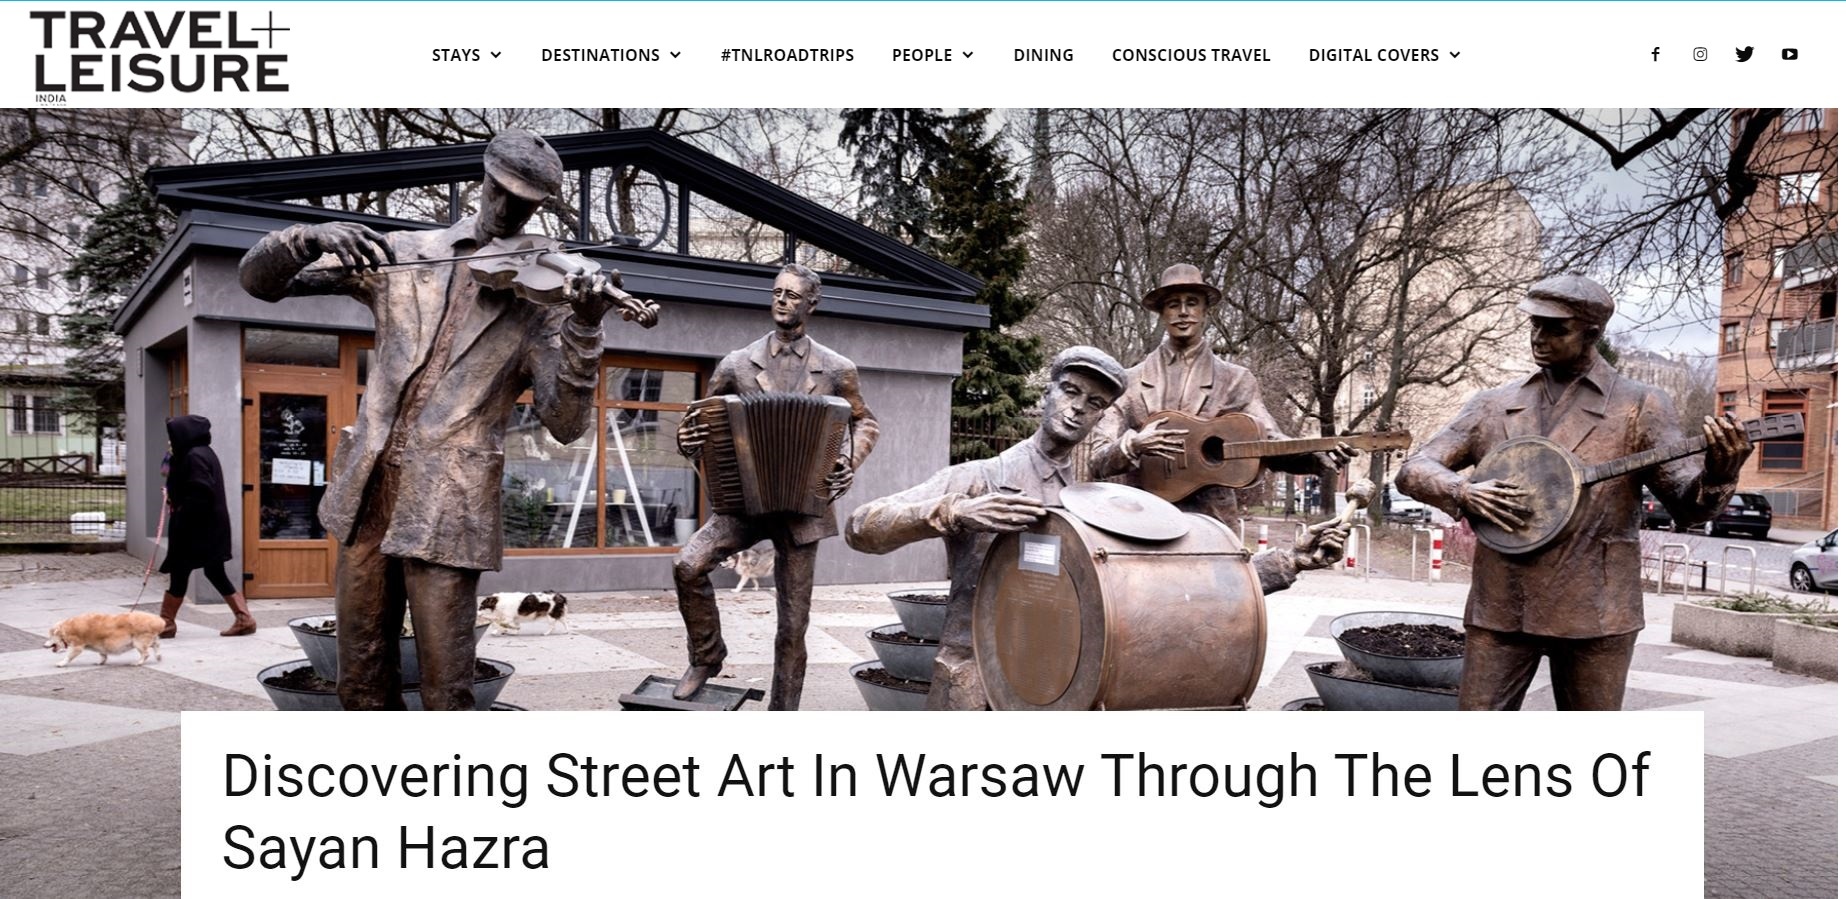 Tear Sheets - Discovering Street Art In Warsaw Through The Lens Of Sayan Hazra